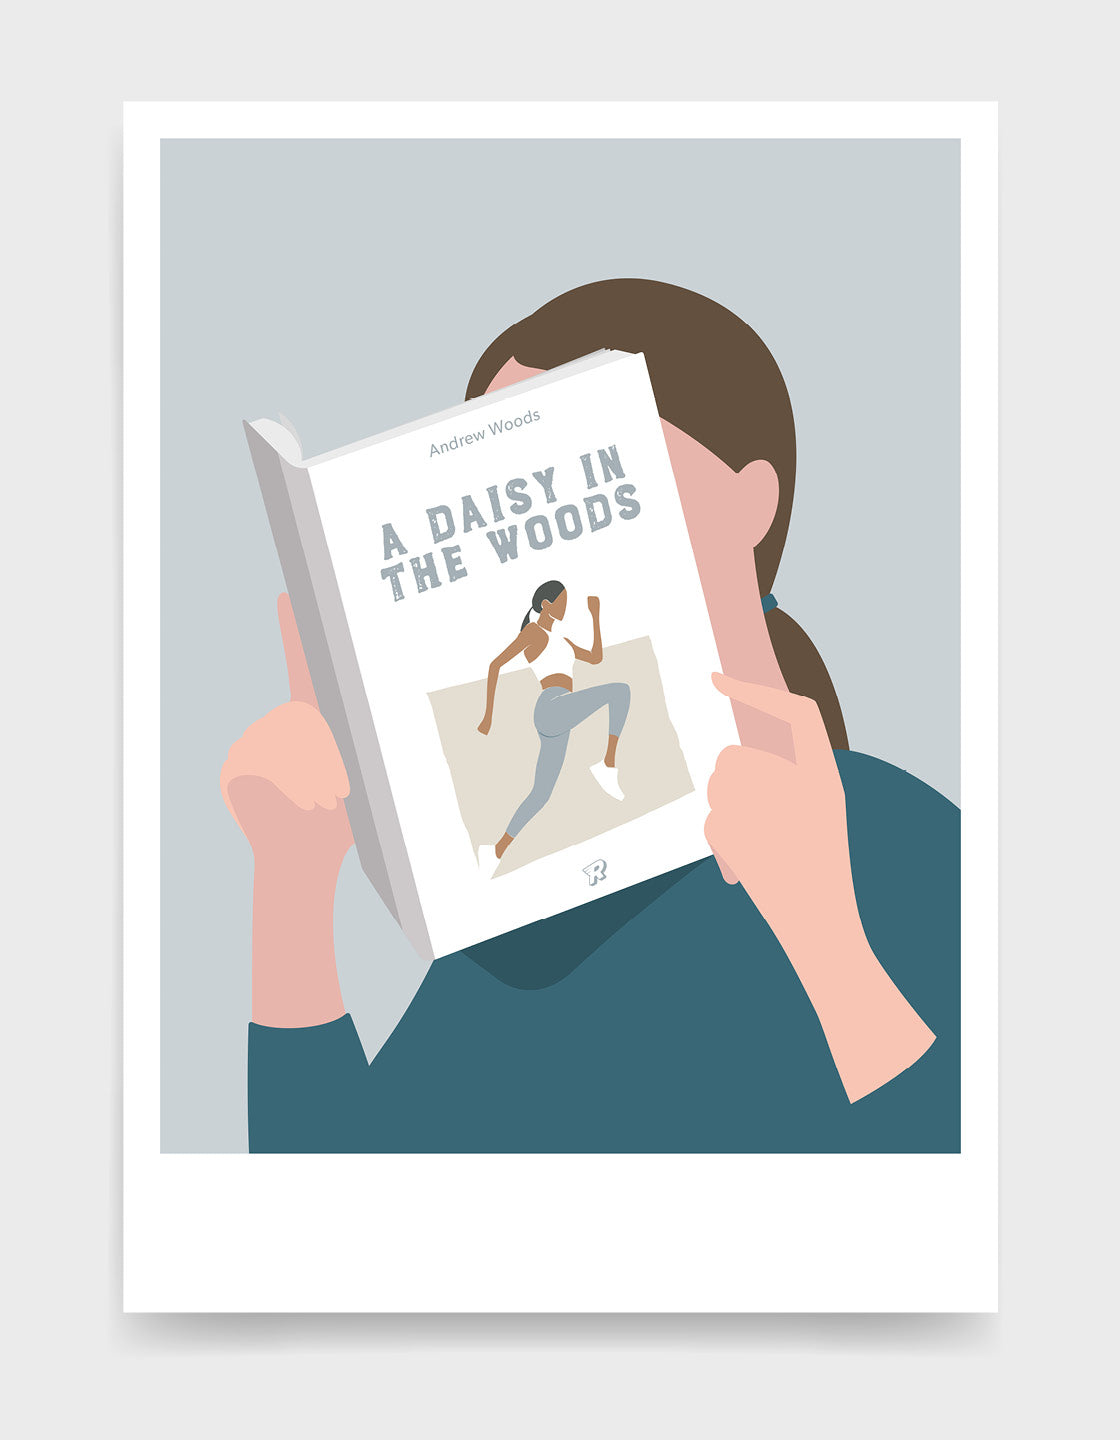 Minimal art print depicting a white person with their head in a book, reading. The book cover can be Personalised, this one has a simple, white design with a slender woman running